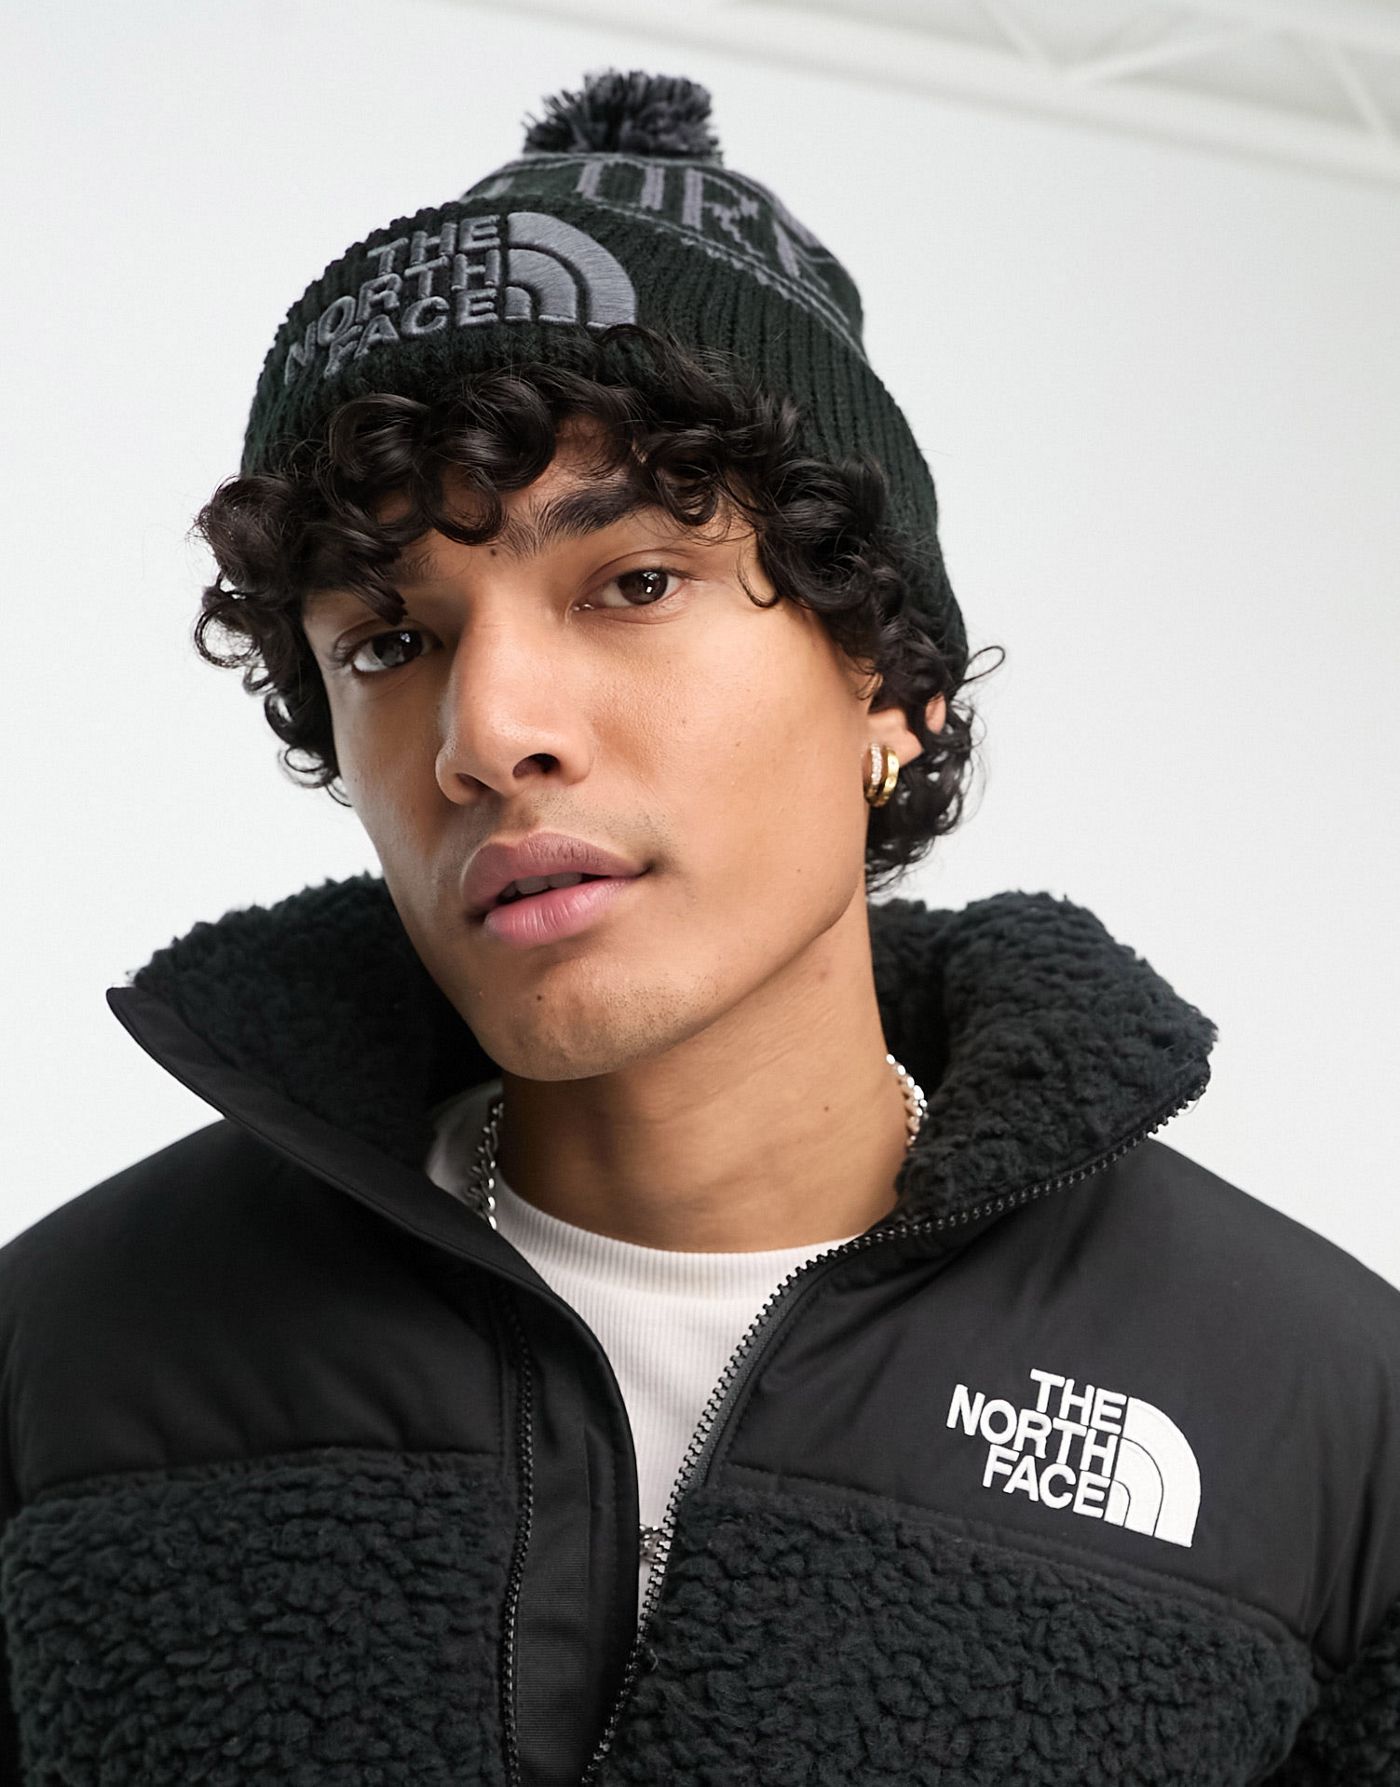 The North Face Retro bobble hat in black and grey